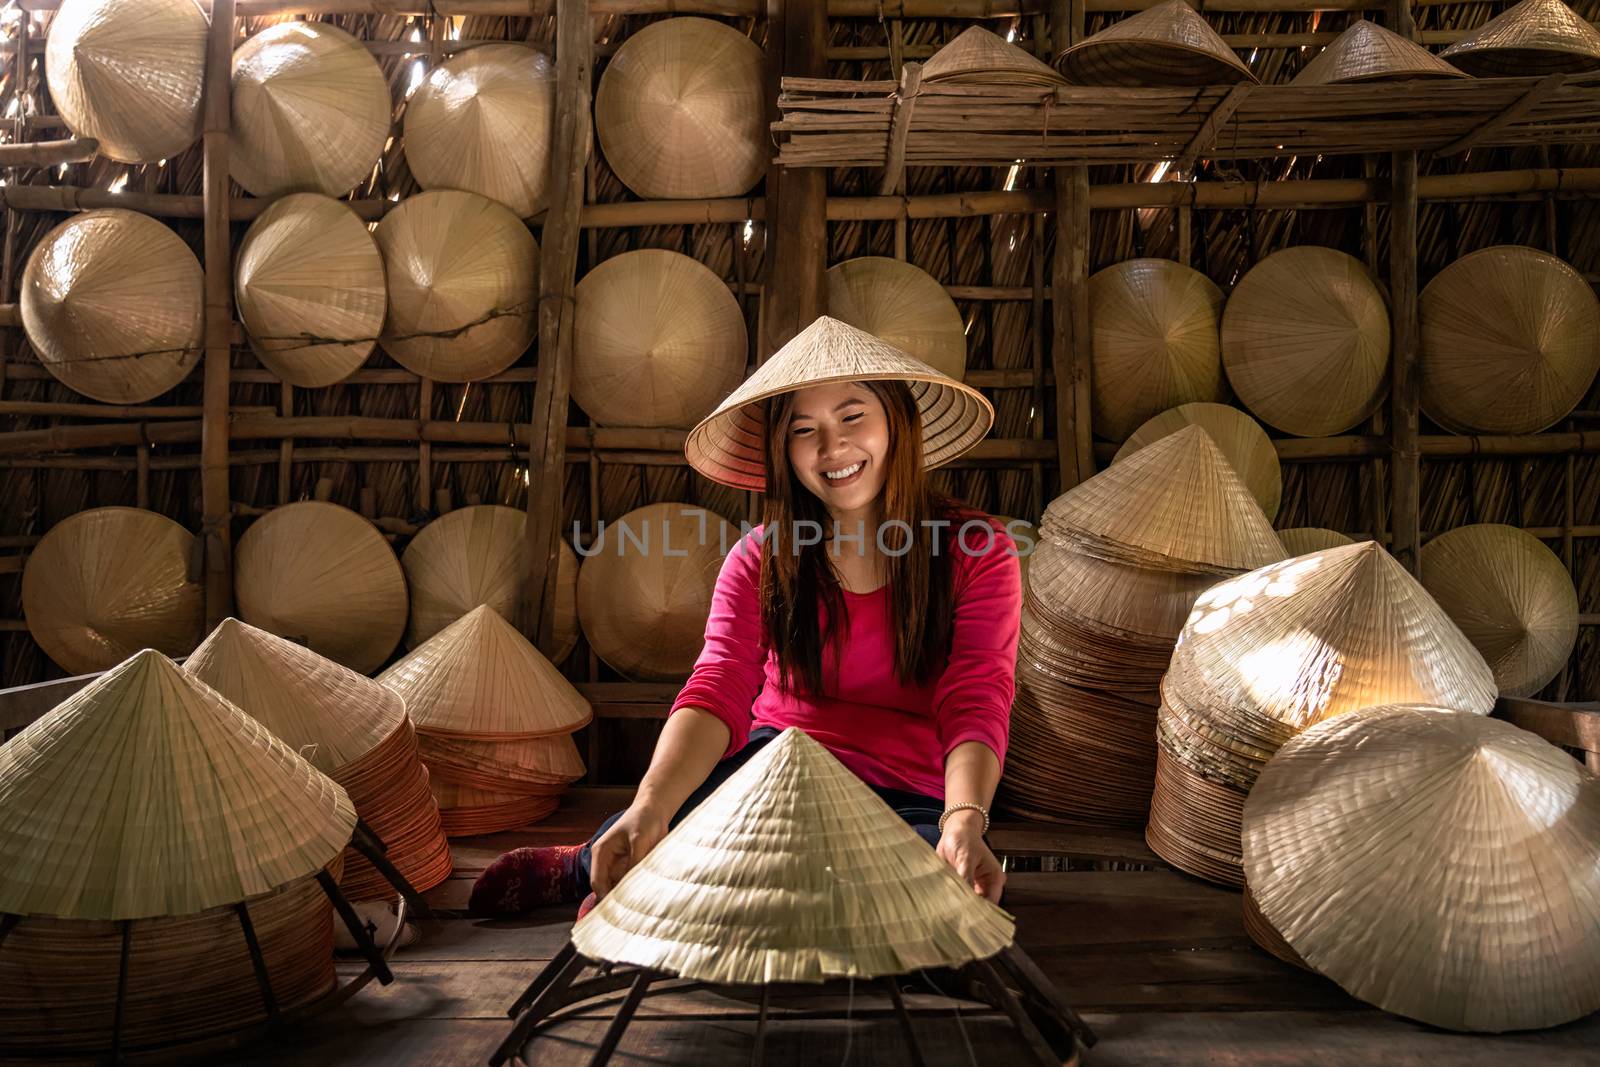 Asian traveler female craftsman making the traditional vietnam hat in the old traditional house in Ap Thoi Phuoc village, Hochiminh city, Vietnam, traditional artist concept